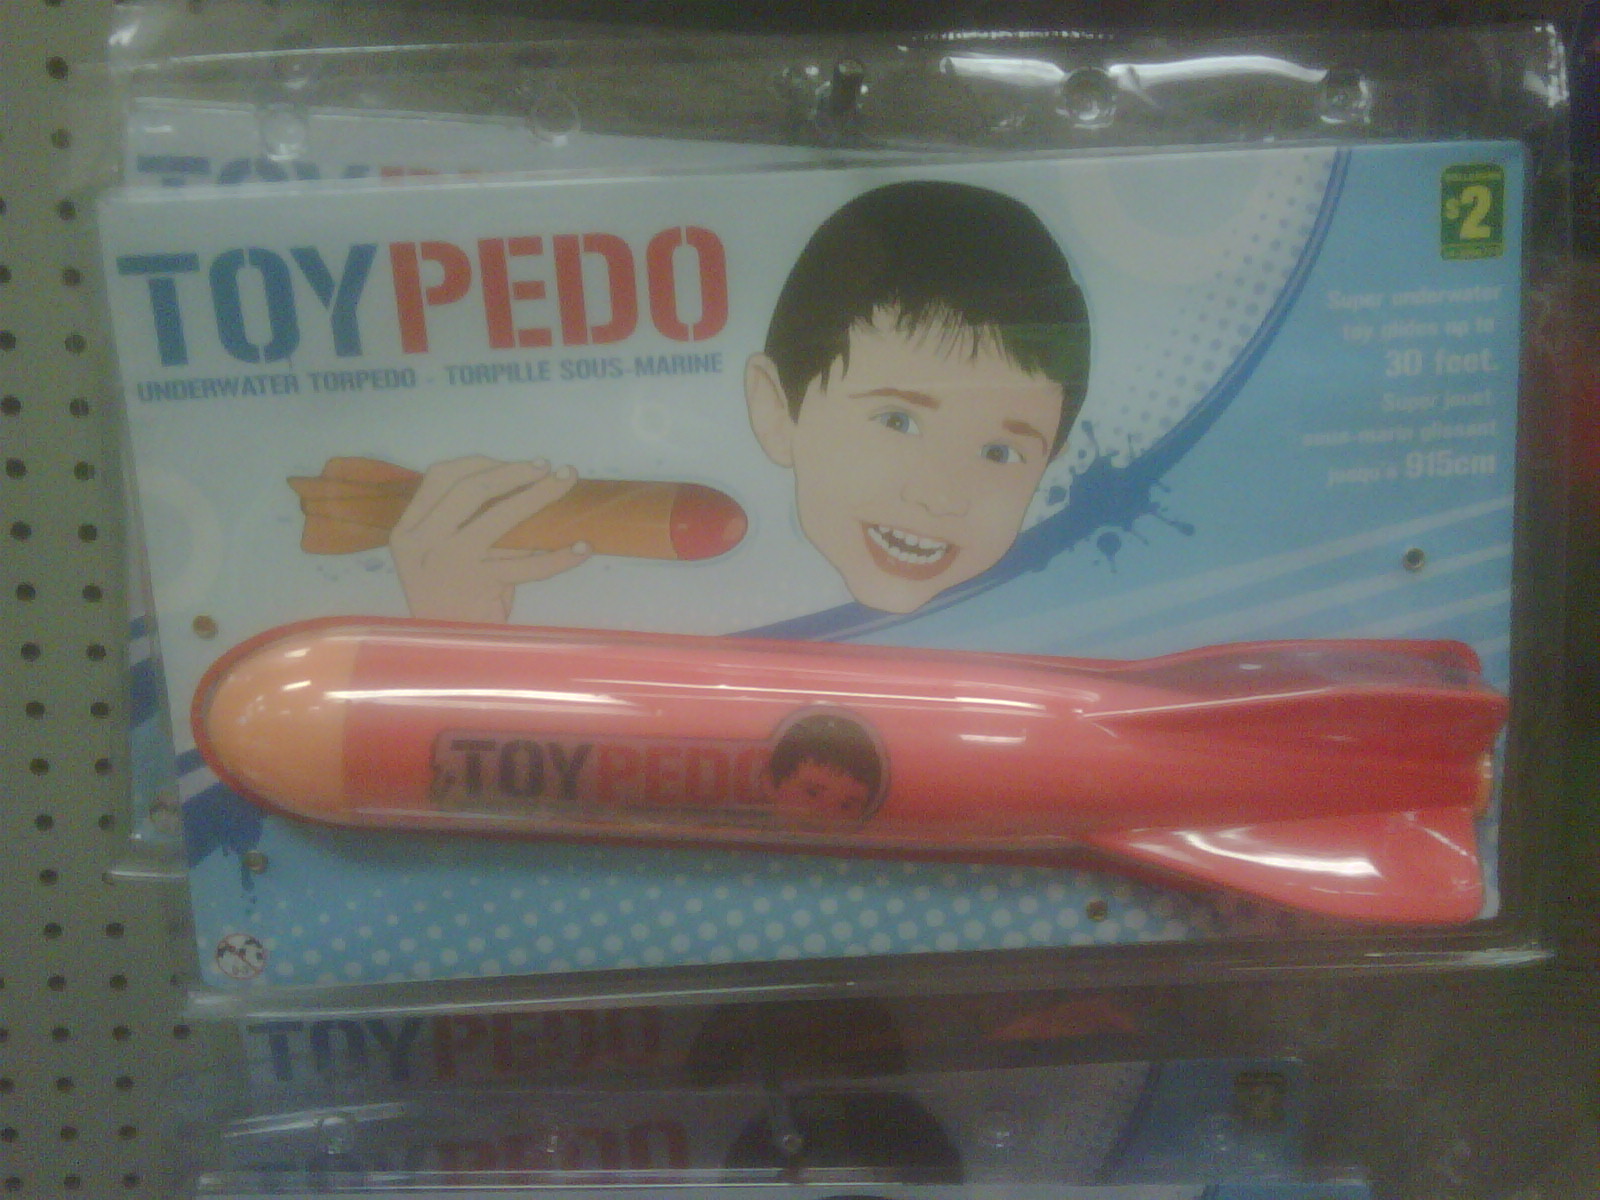 A must have for pedos